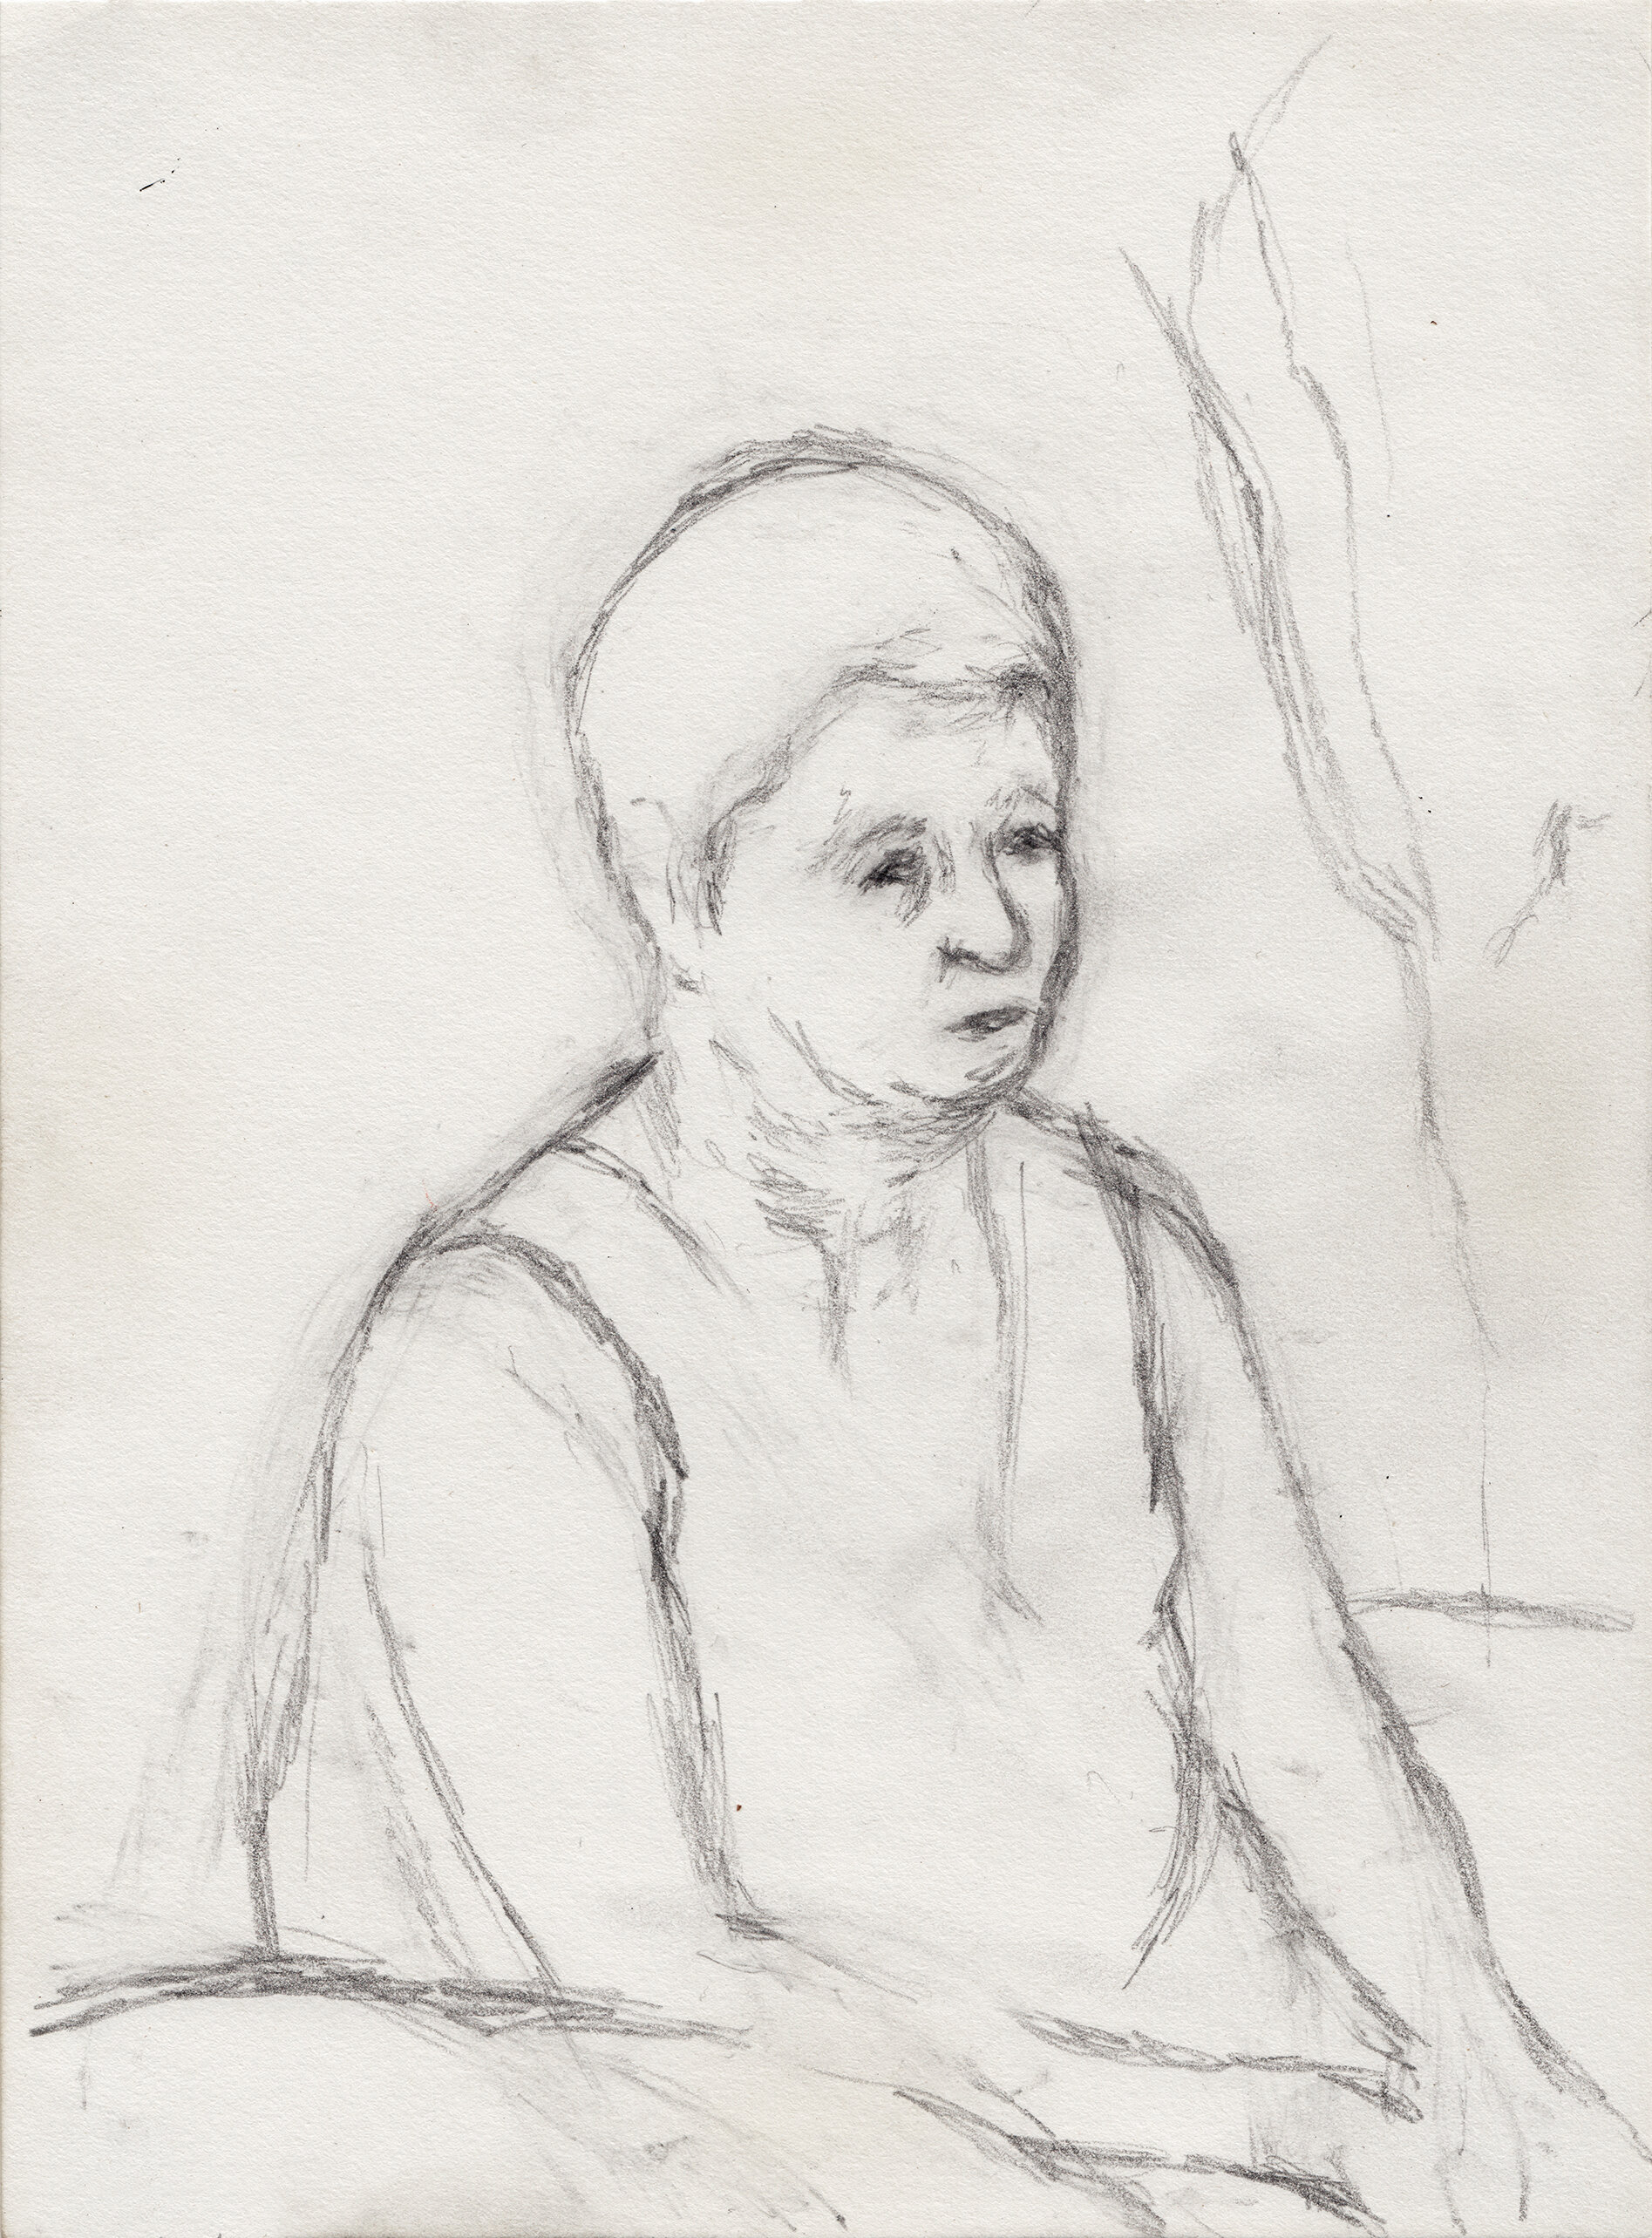   Nechama (My Mother) , 8x6", Pencil on paper, 2010 